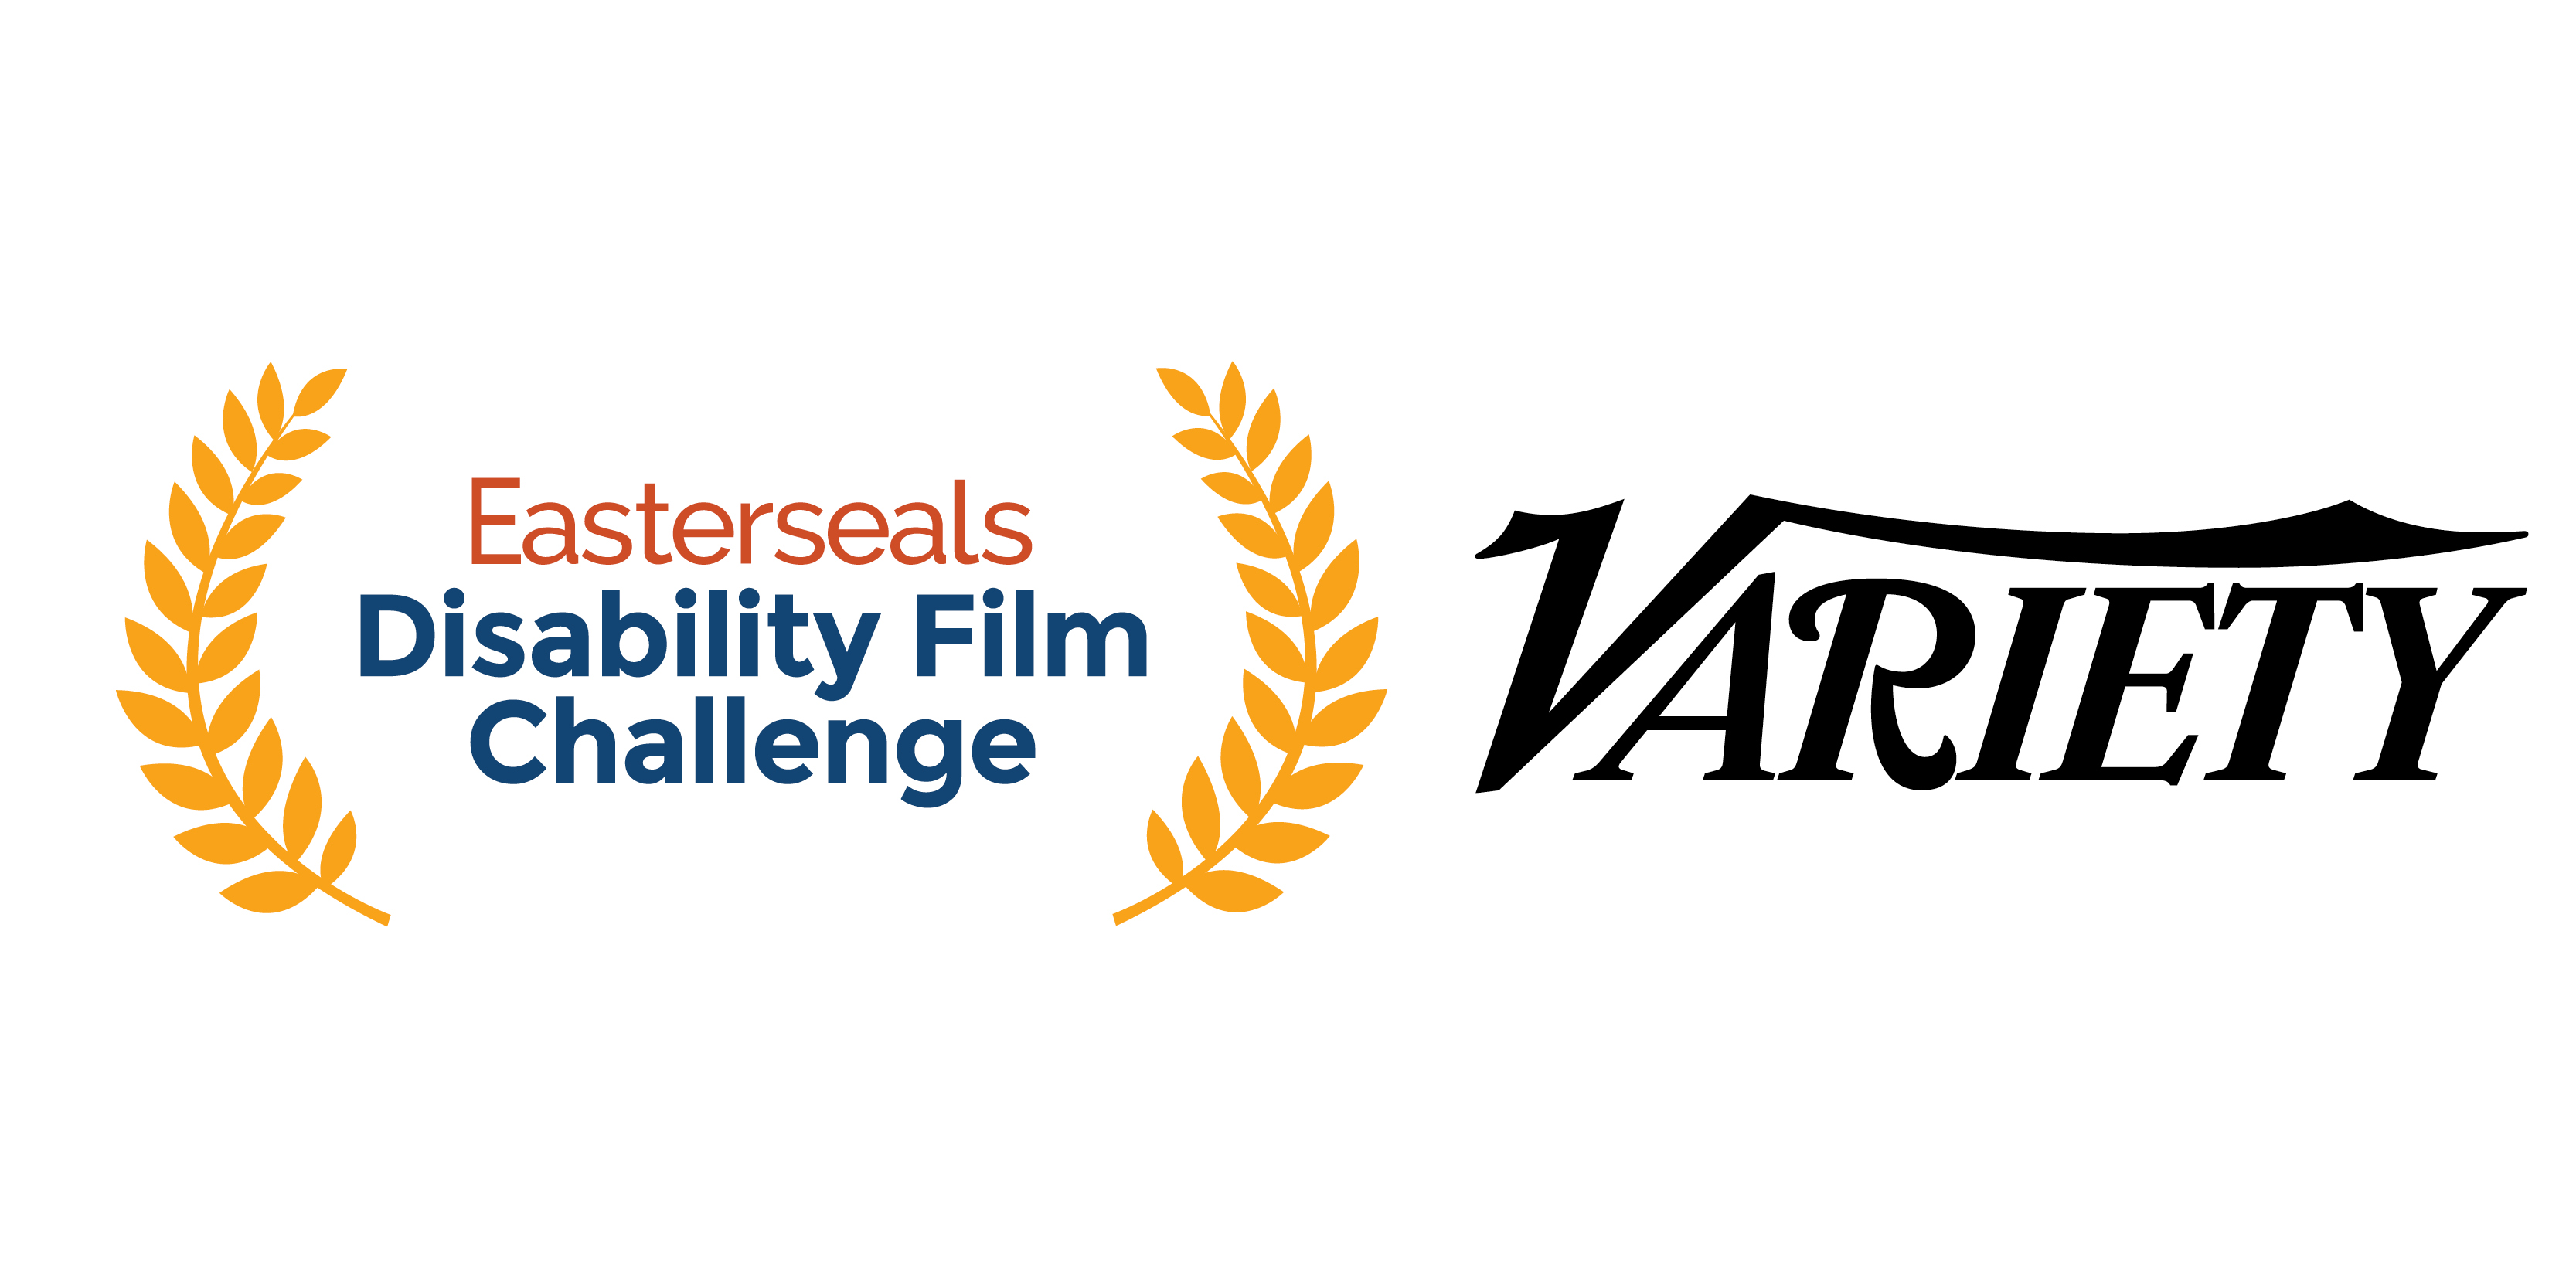 Easterseals Disability Film Challenge logo and Variety logo